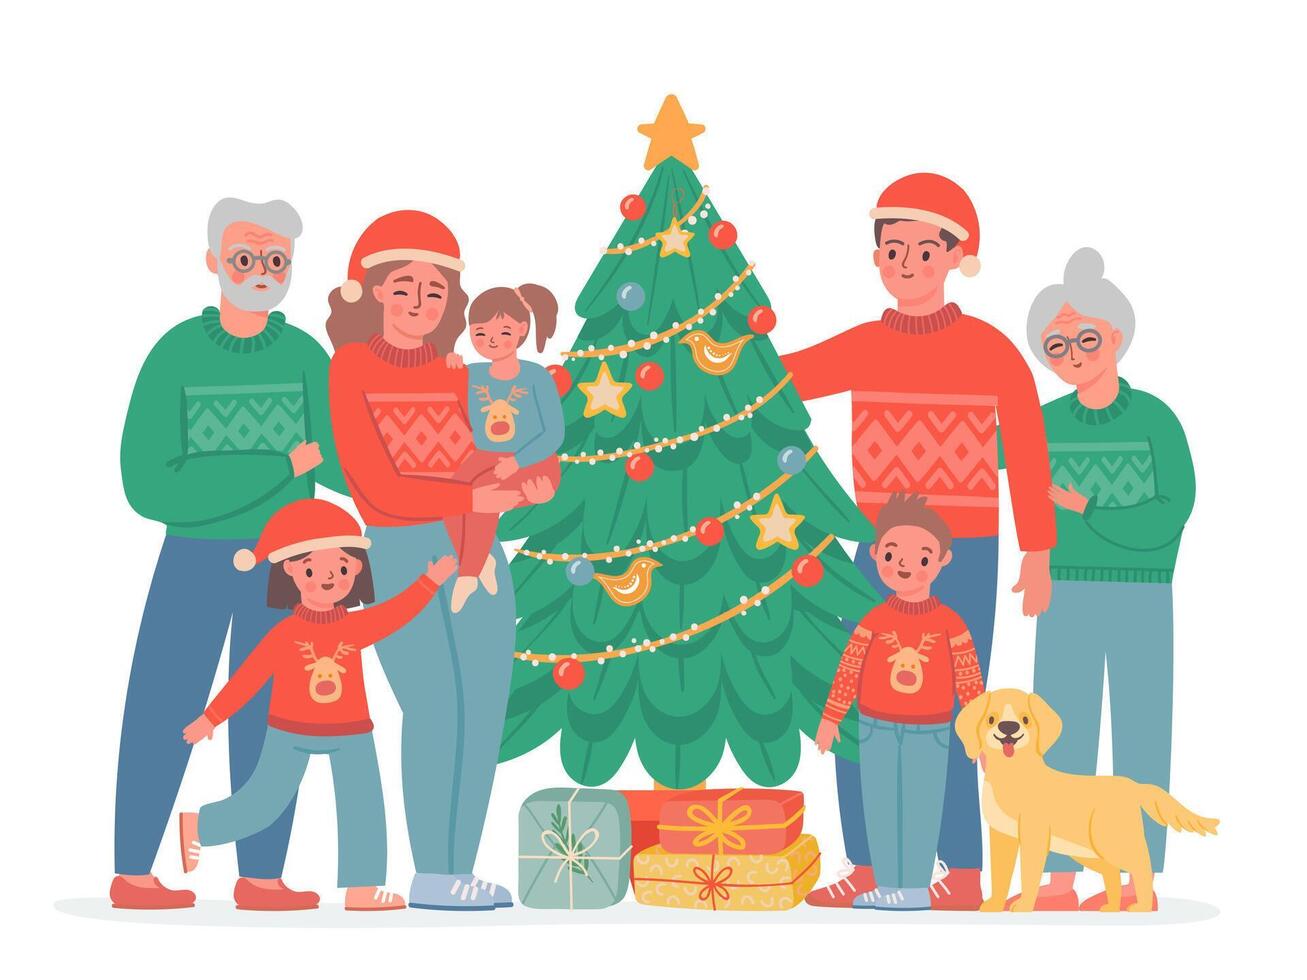 Big christmas family. Grandma, grandpa, mom and dad, kids and dog in sweaters and santa hat. Vector family portrait with decorated pine tree